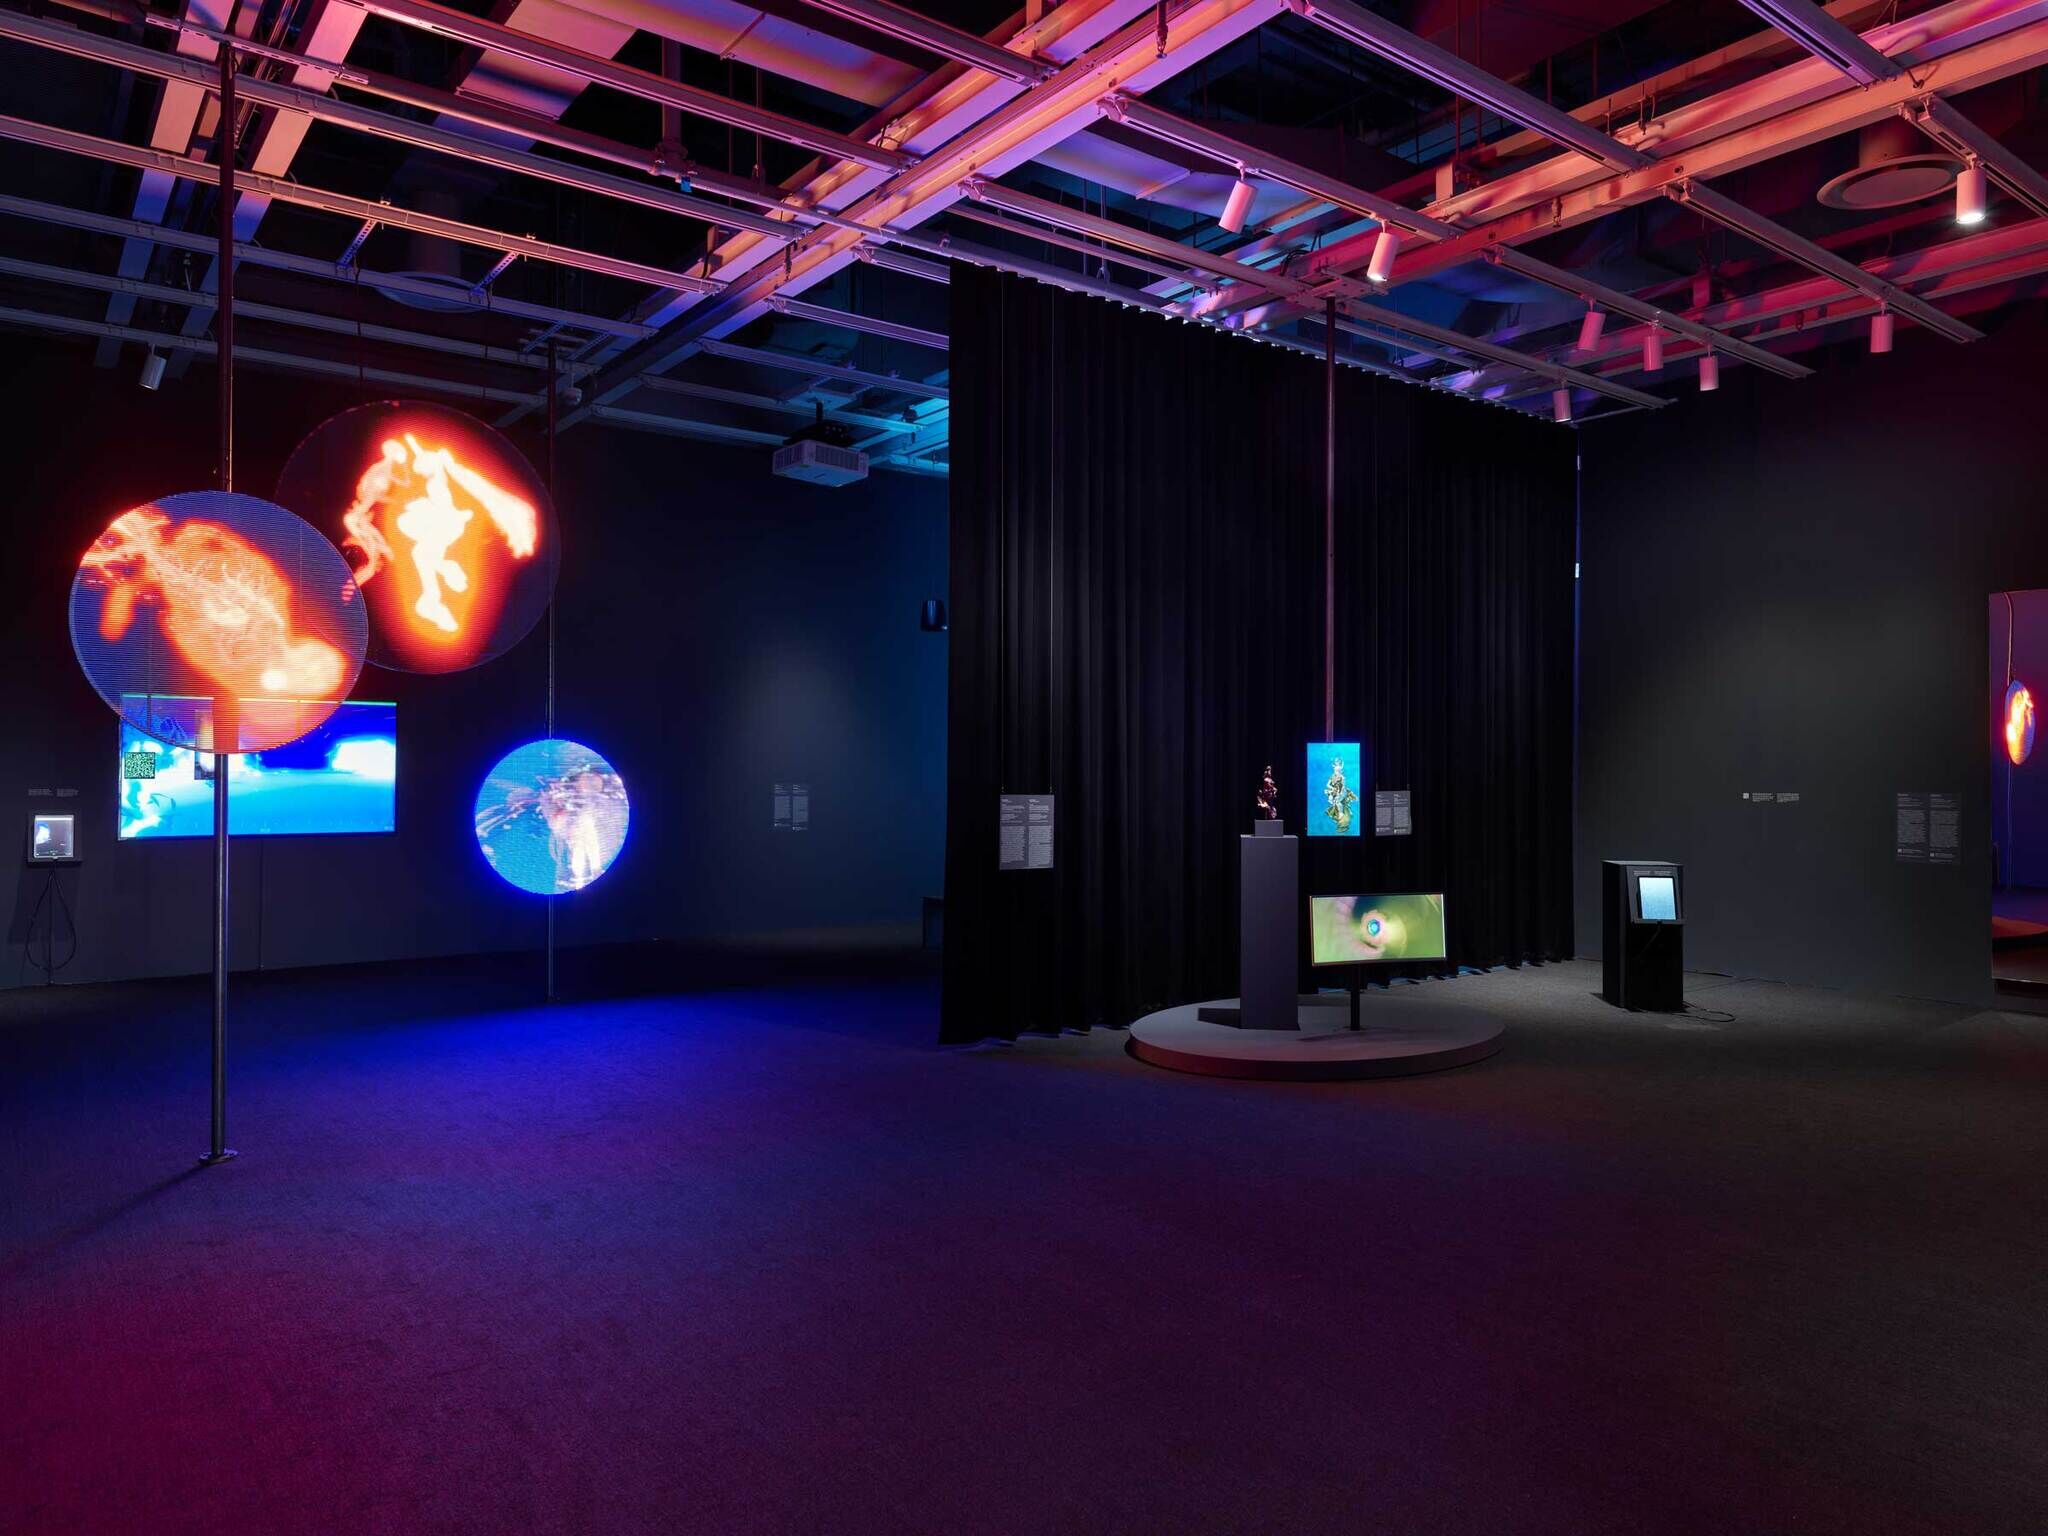 A gallery view of the exhibition with three circular glowing LED screens. To the right, there is a small sculpture next to two computer screens, and a big box machines with a screen all in front of a curtain with a light coming out behind it.